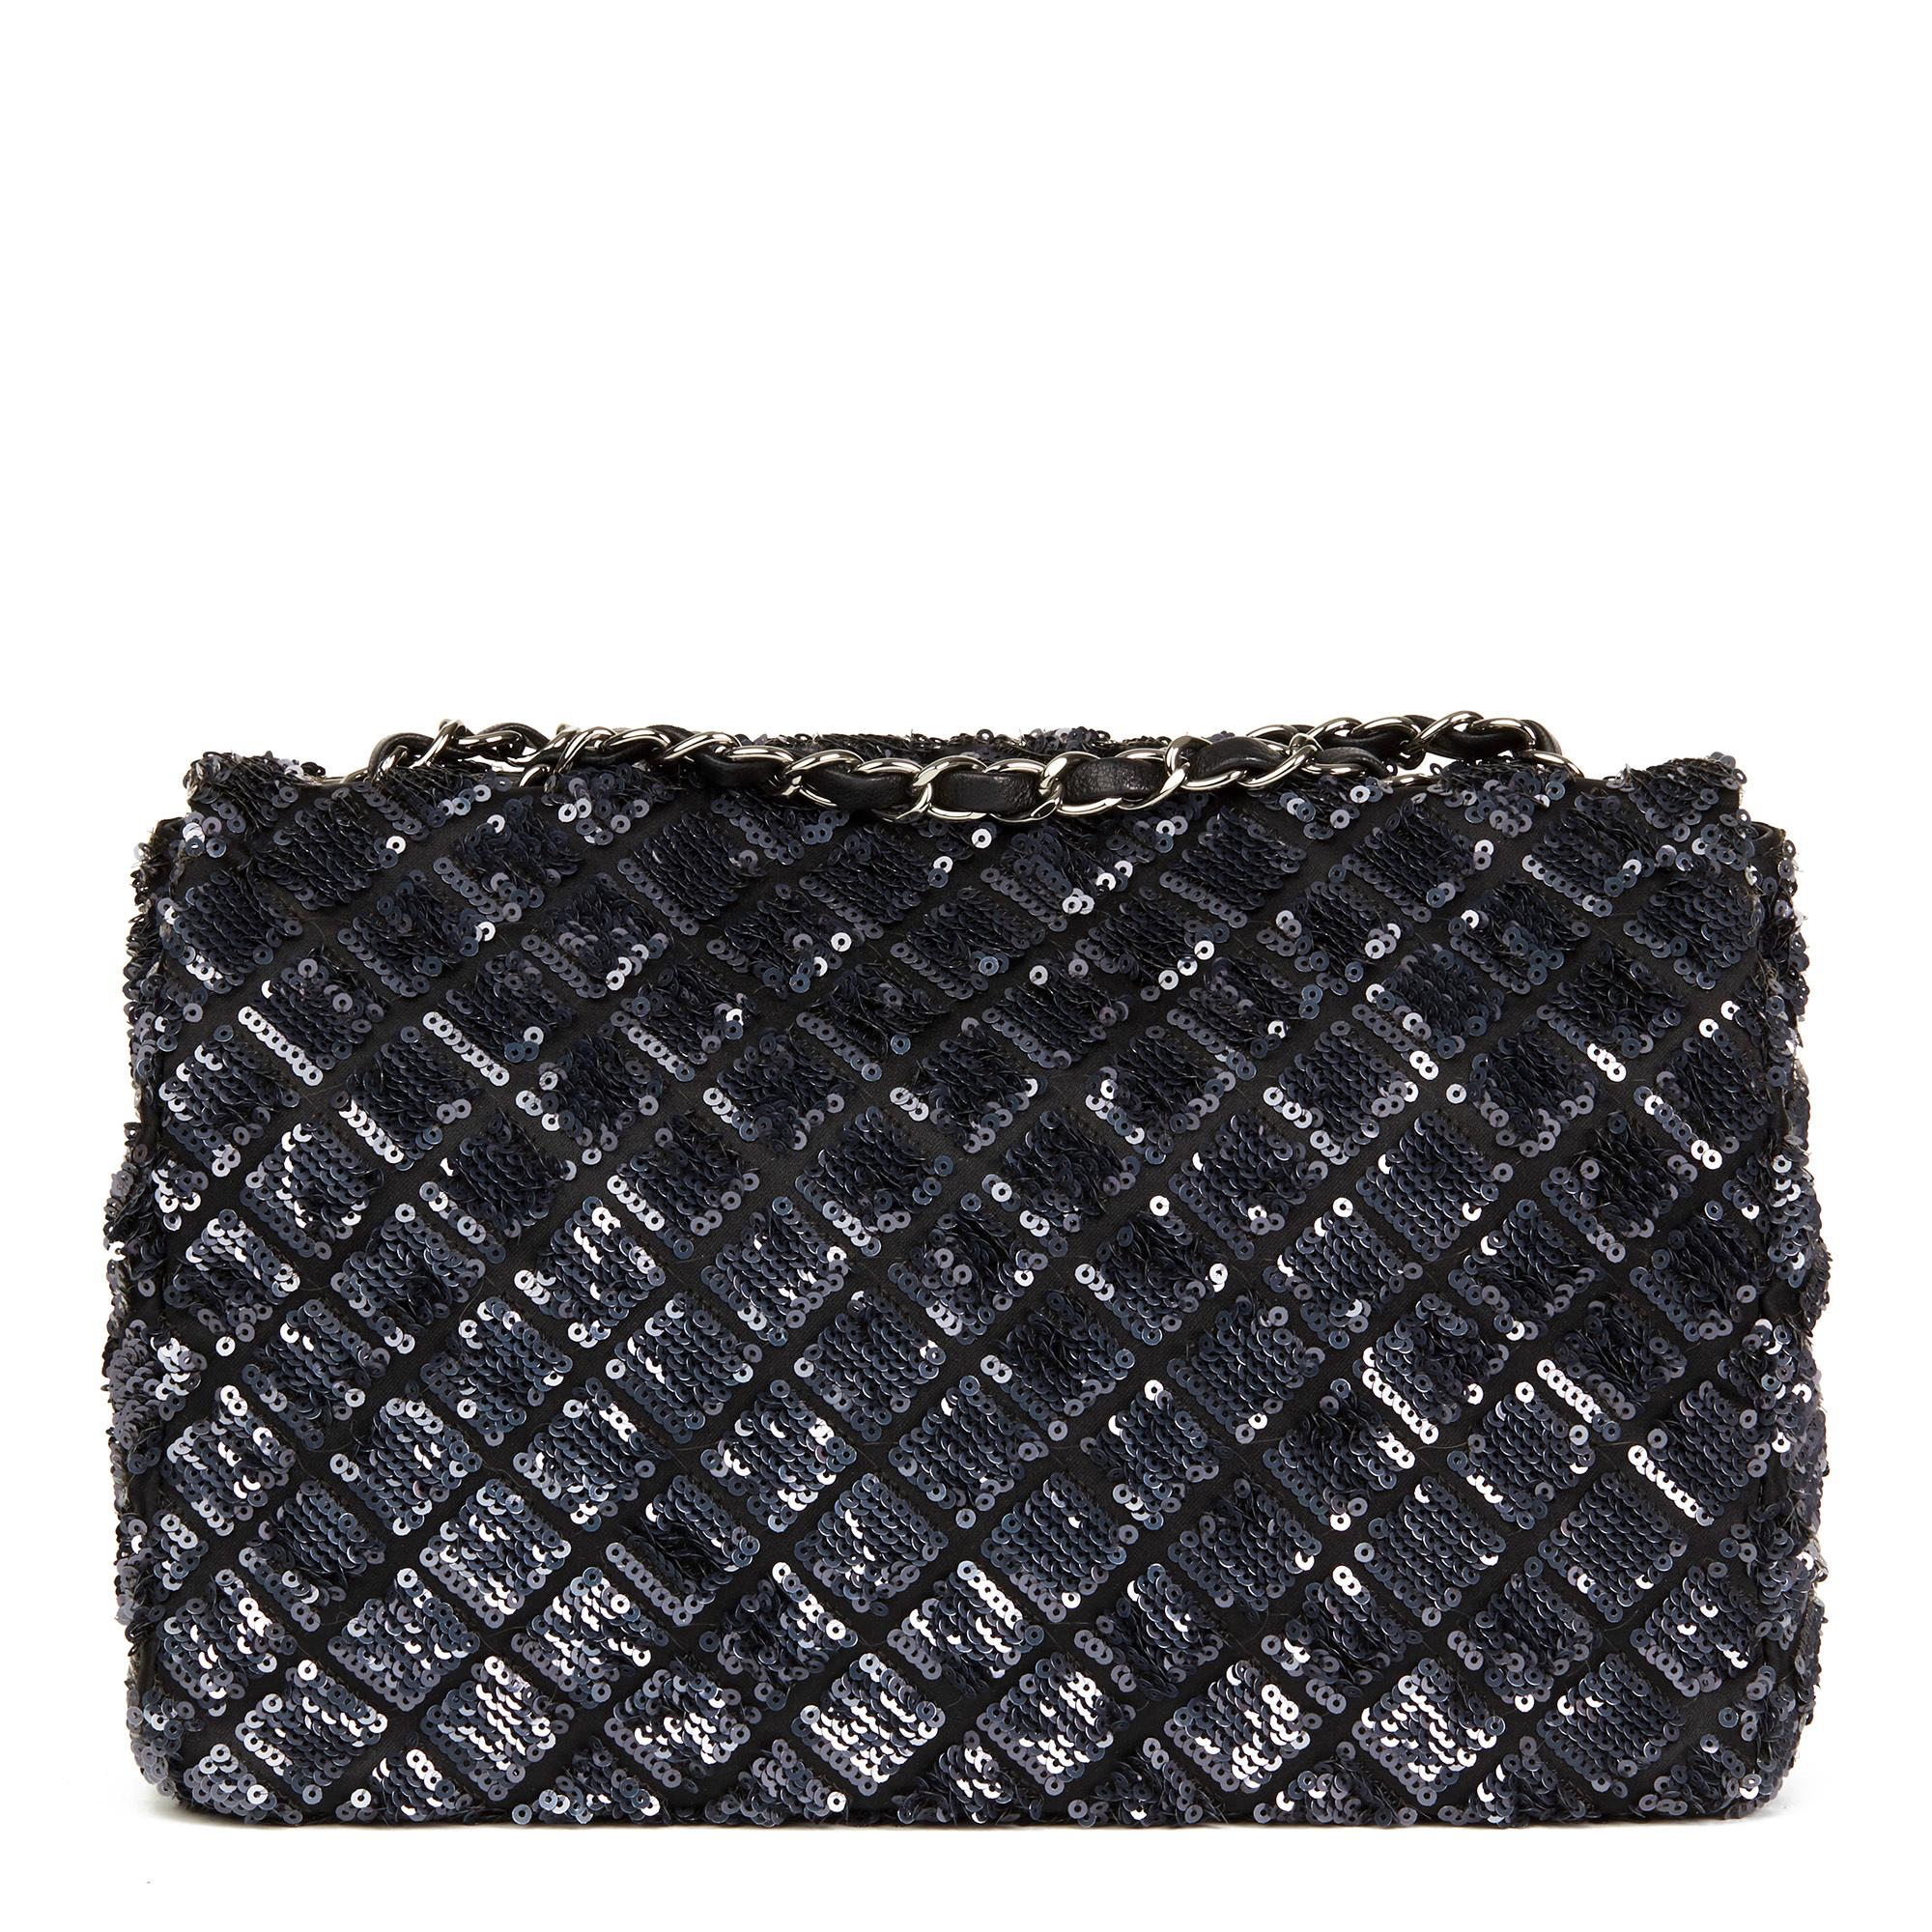 Women's 2013 Chanel Navy Sequin Embellished Classic Single Flap Bag